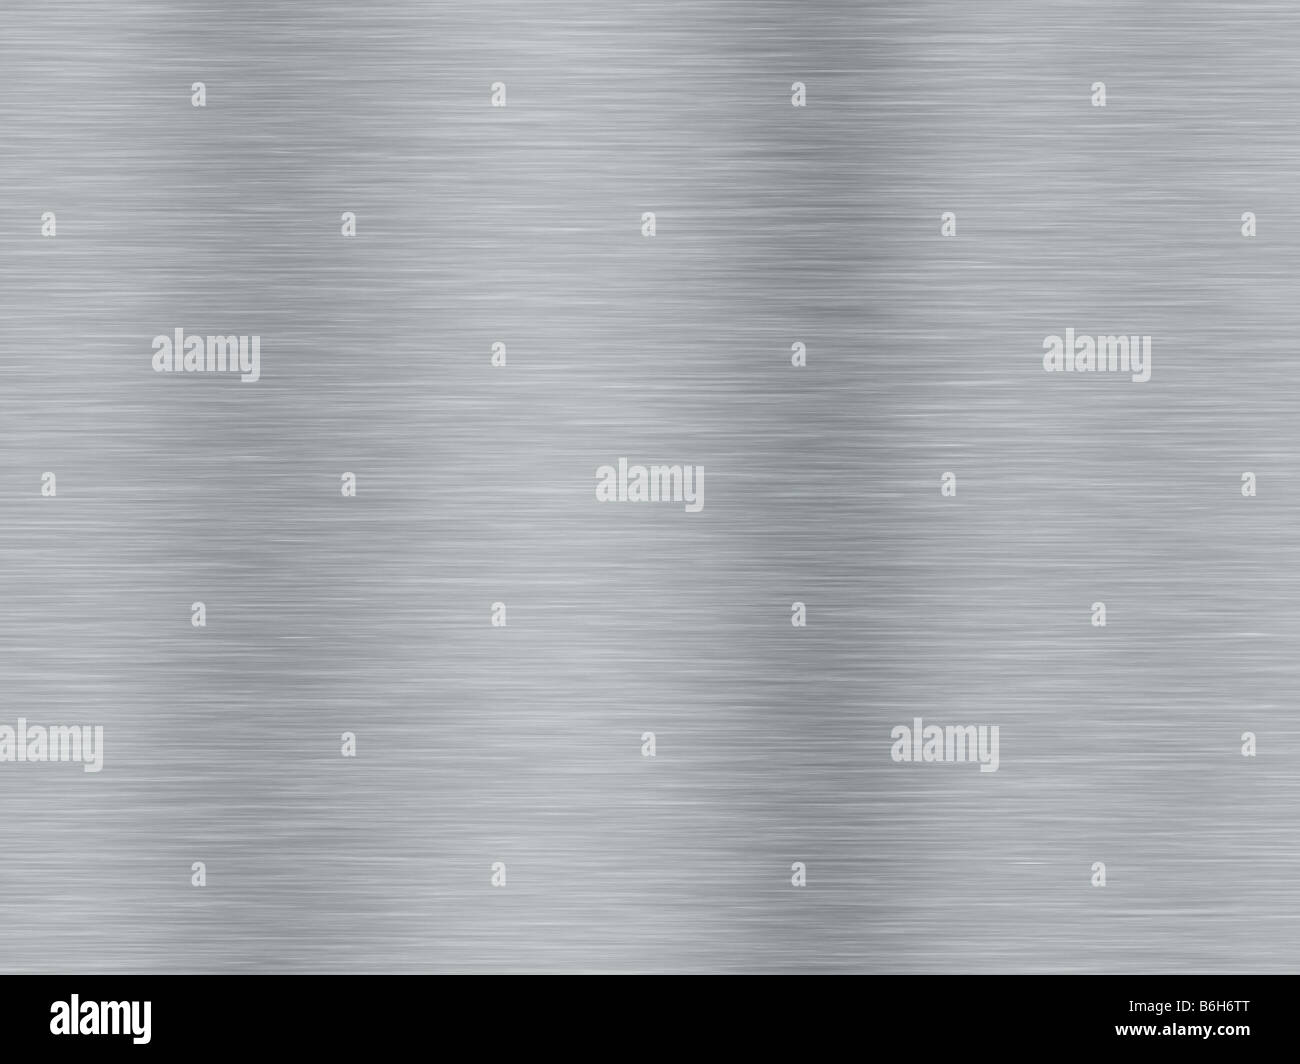 Stainless Steel Abstract Background Texture With Smoothening Stock ...